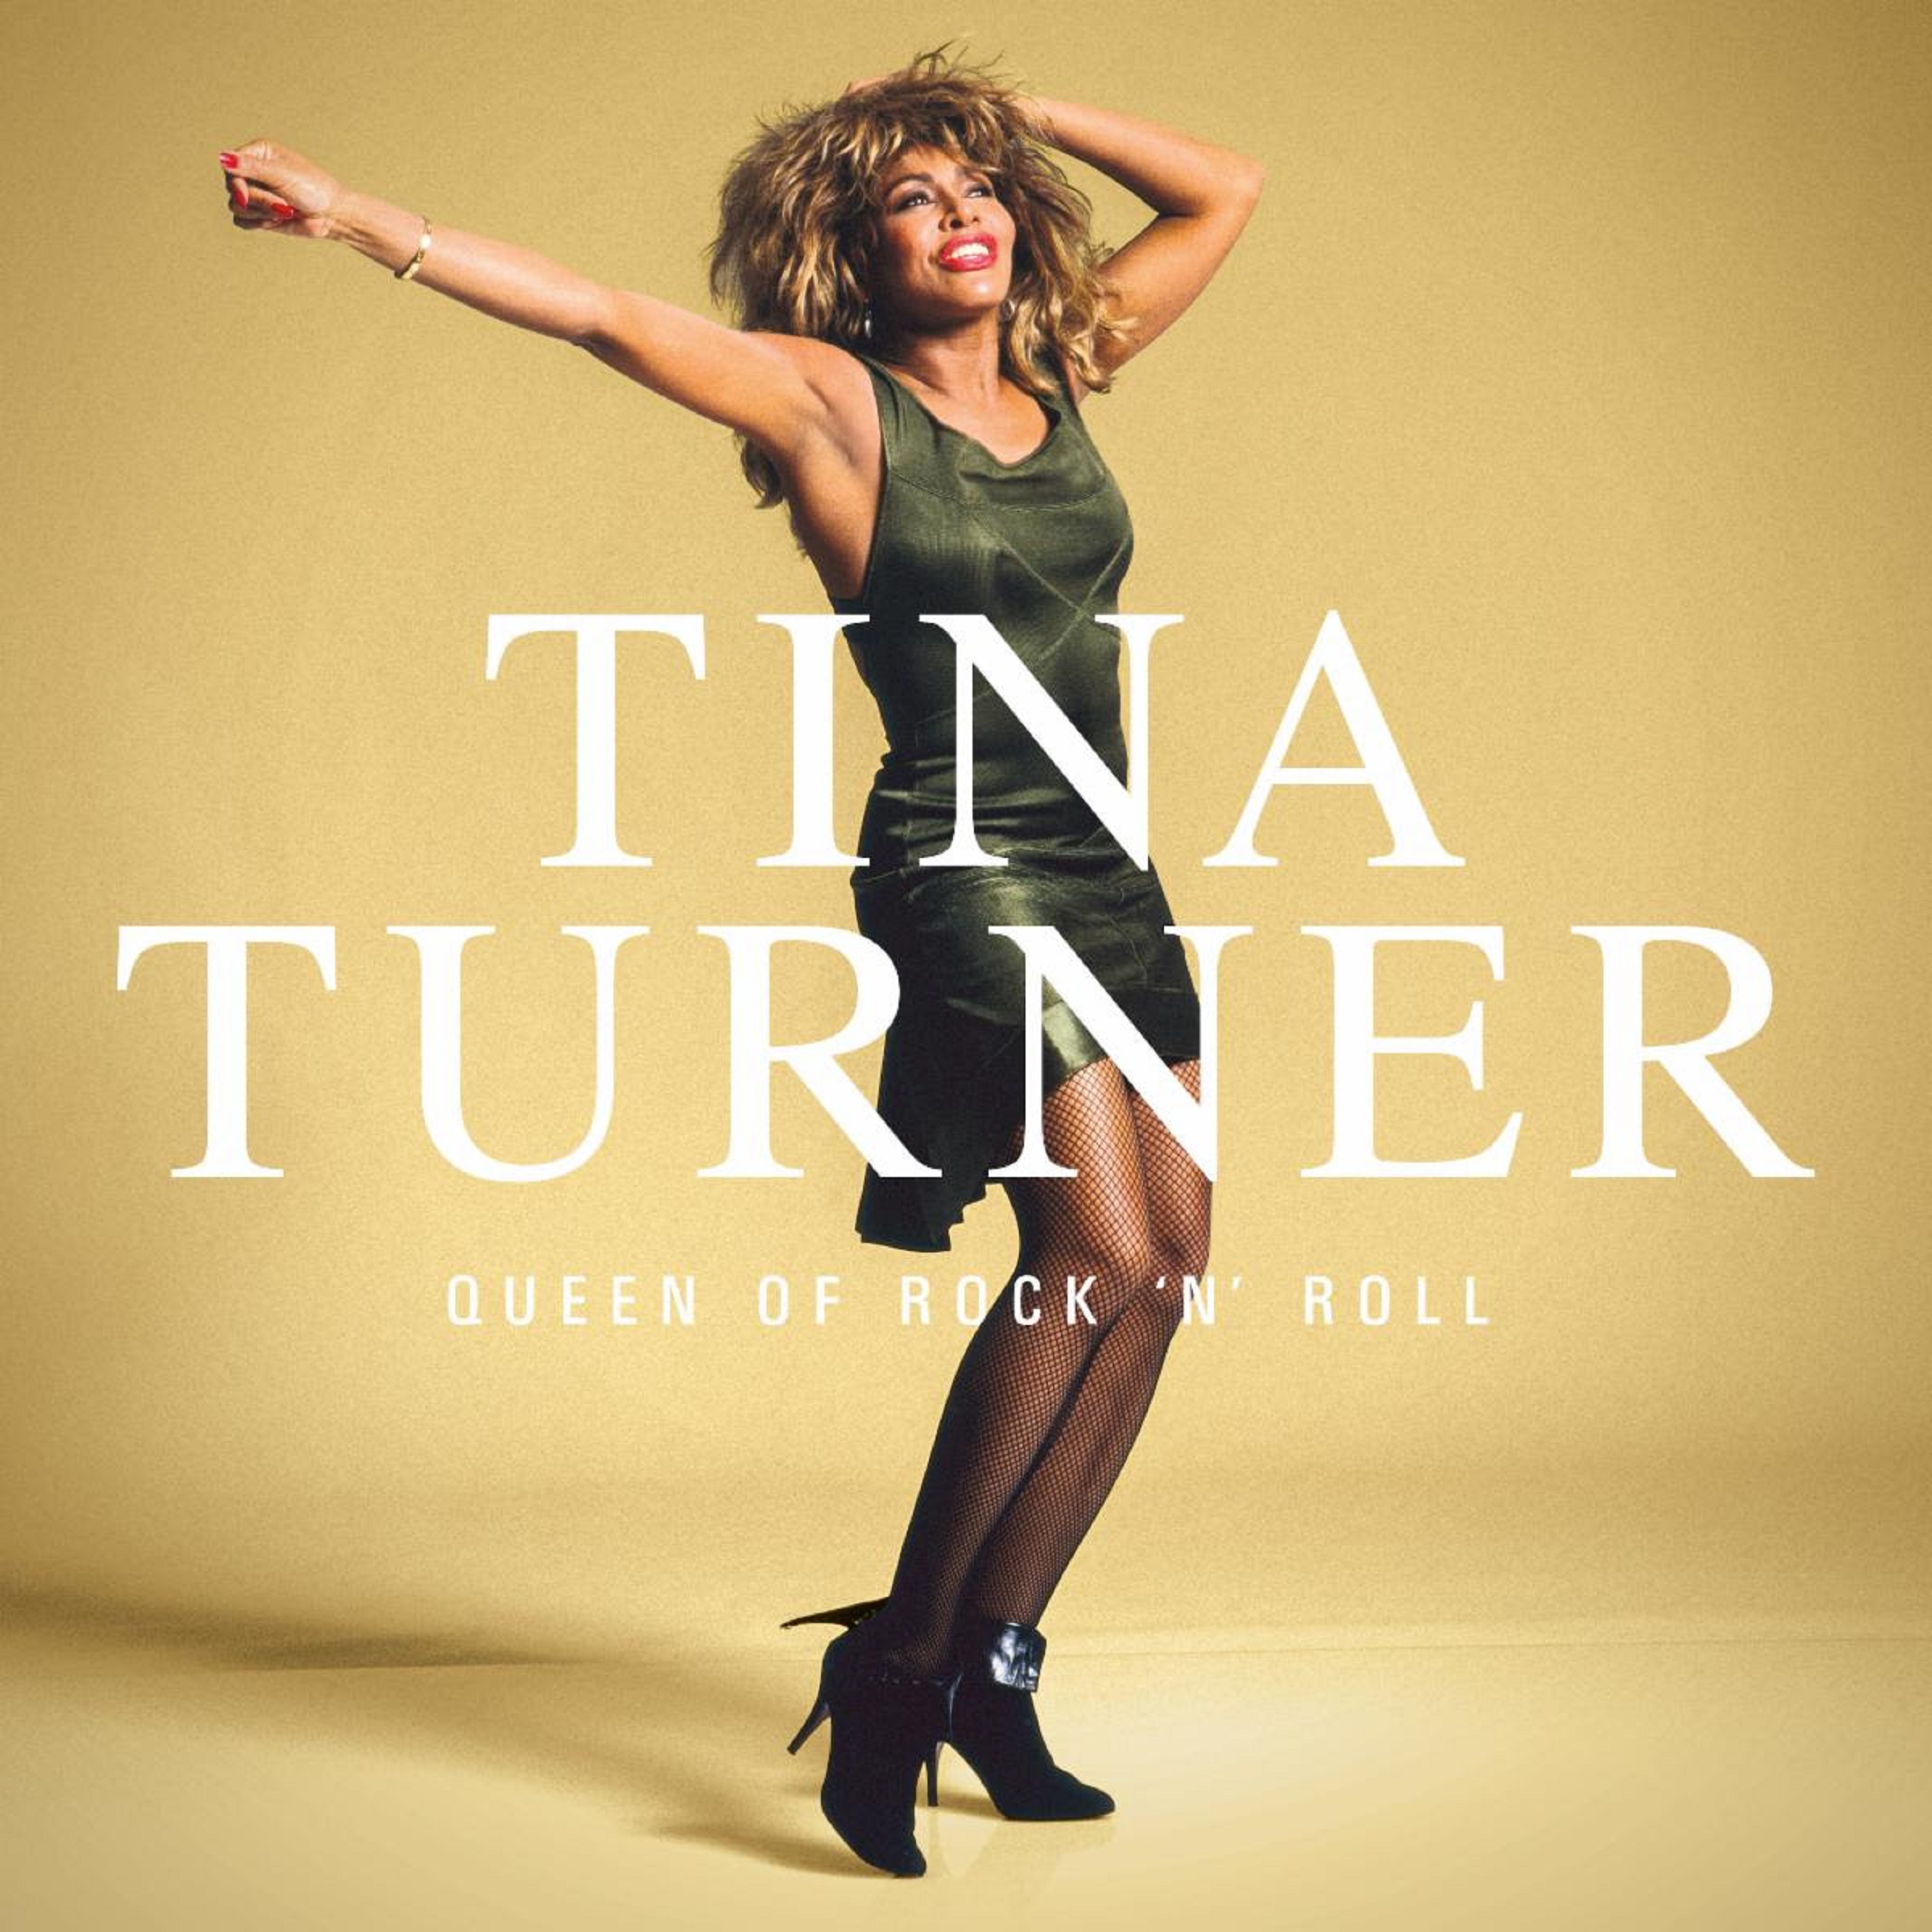 Tina Turner "Queen of Rock 'n' Roll" due out November 24 on Rhino